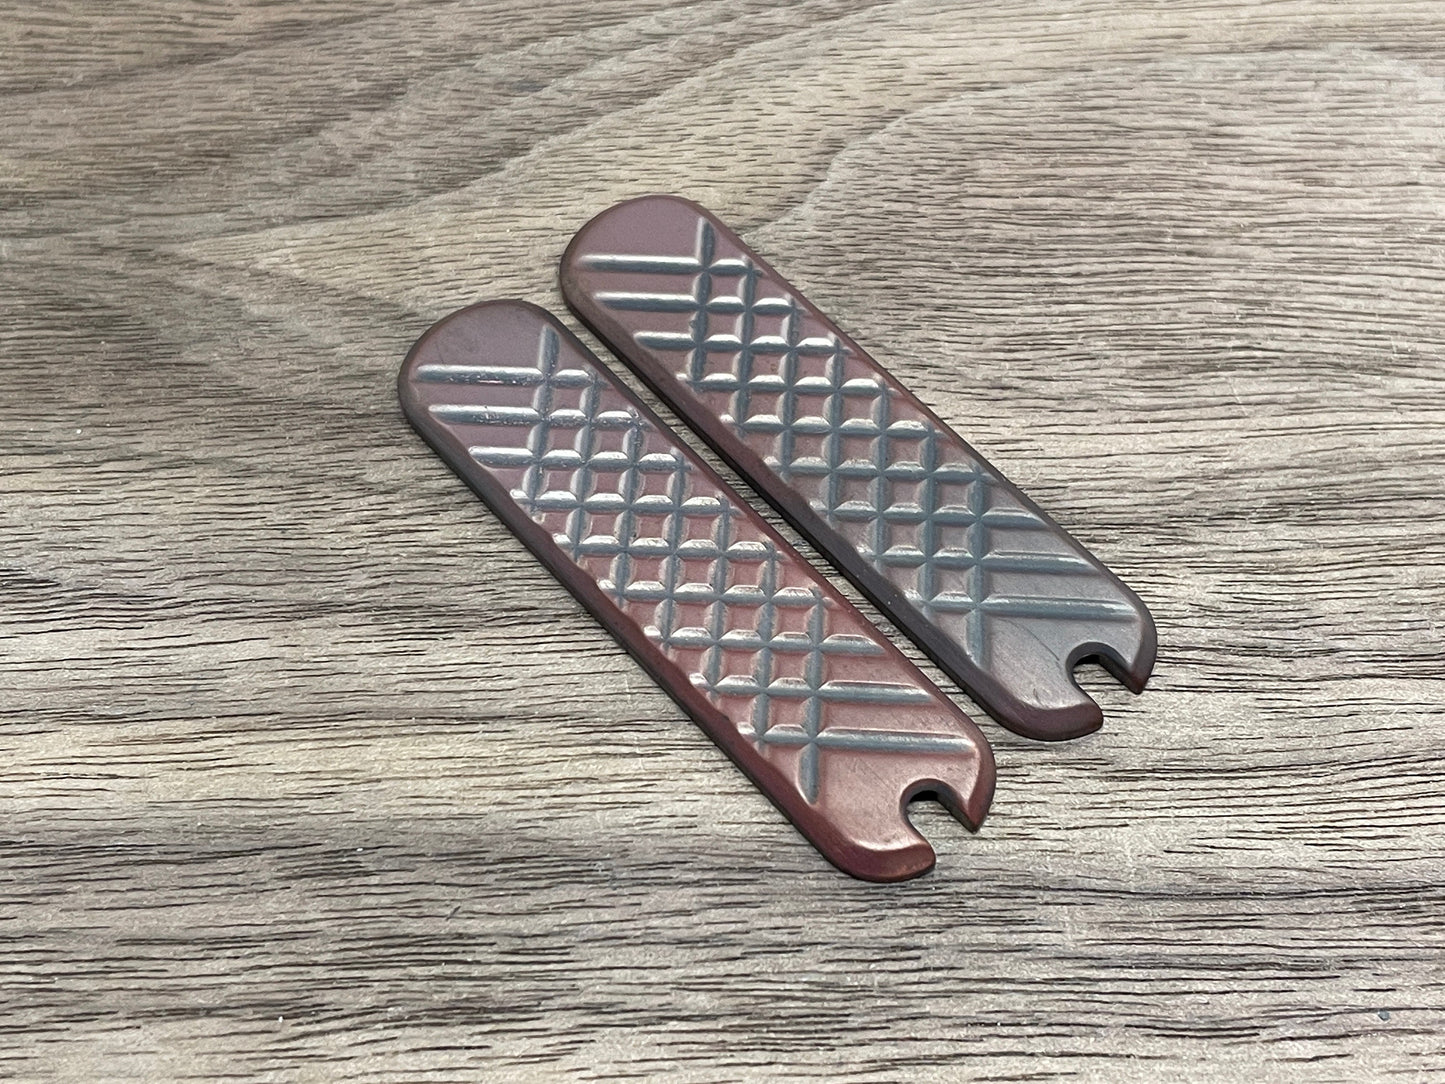 58mm FRAG Medieval Copper Scales for Swiss Army SAK